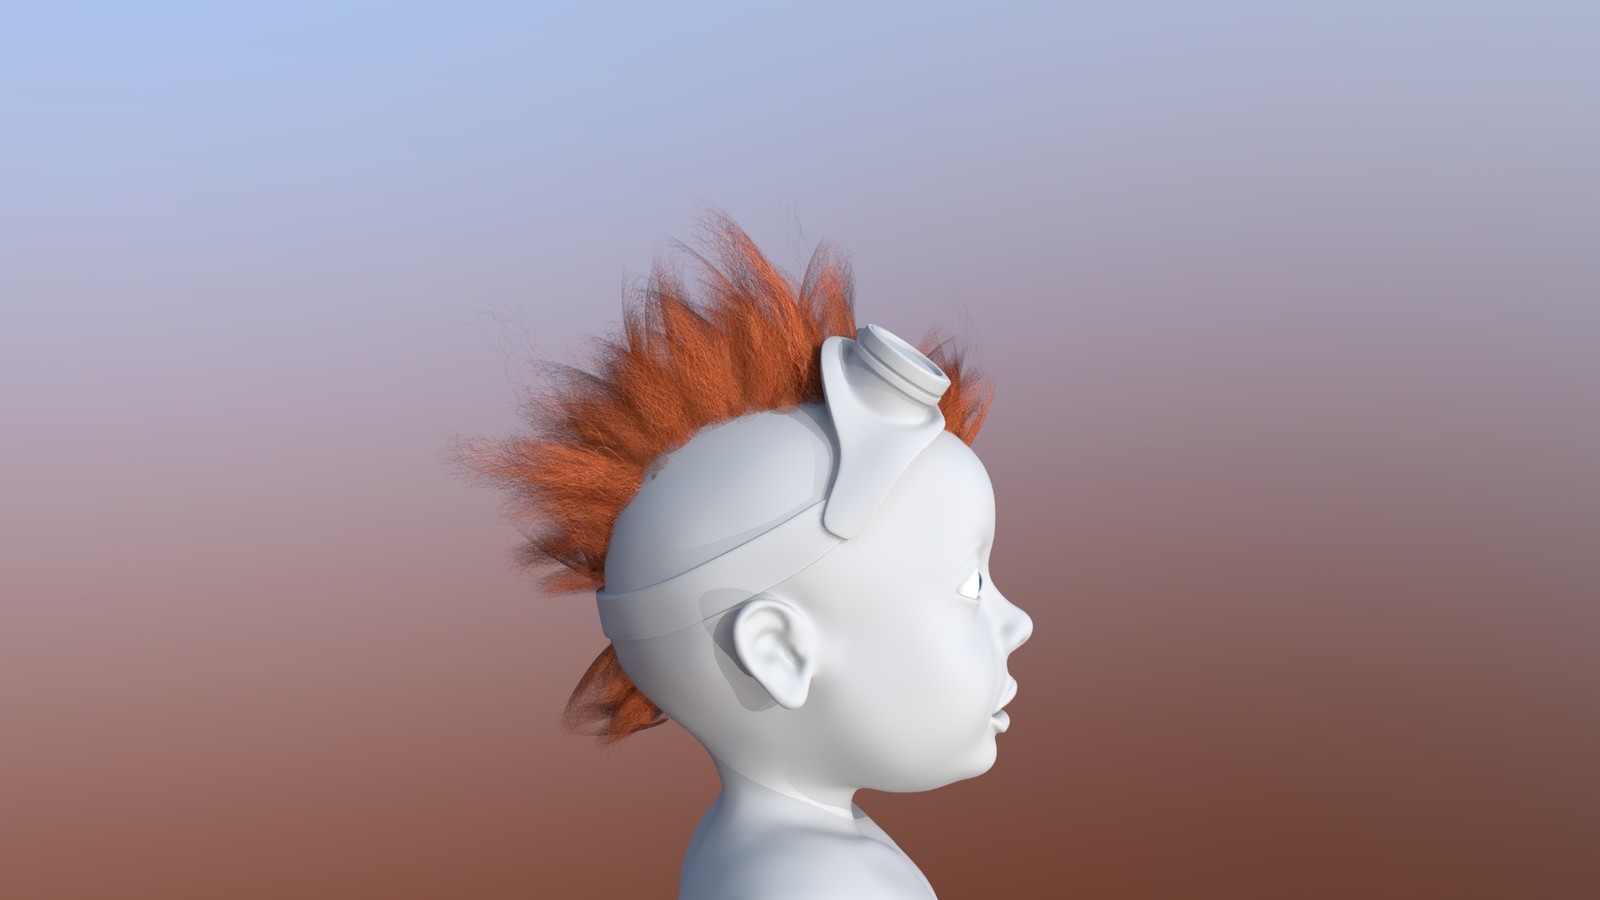 Hair was done manually by placing different polycards.